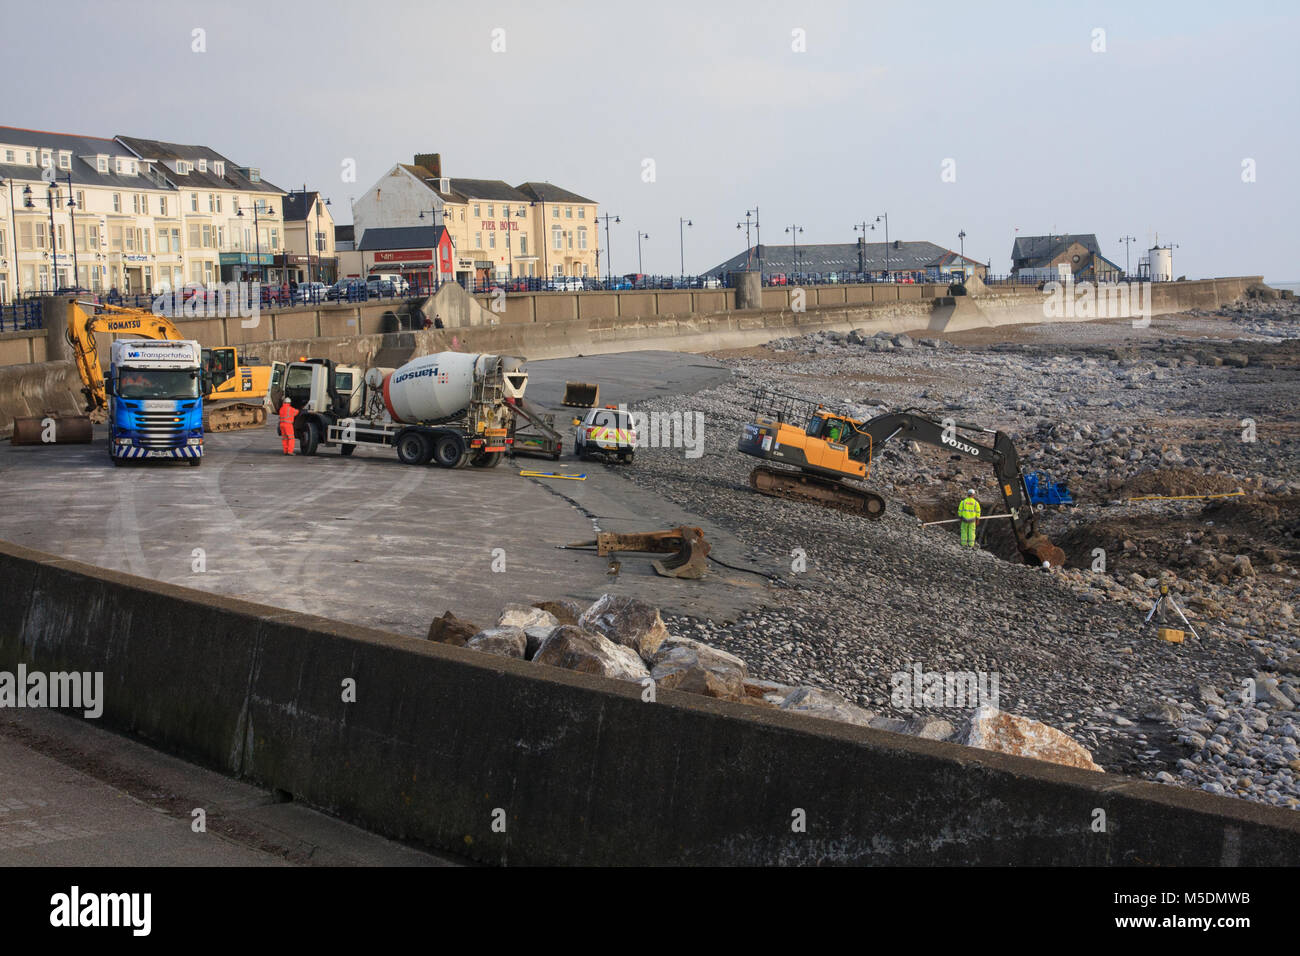 Porthcawl, UK. 22nd Feb 2018. Work started on replacement of Porthcawl's infamous concrete beach with a terreced structure in a sand colour. Credit: Andrew William Megicks/Alamy Live News. Stock Photo